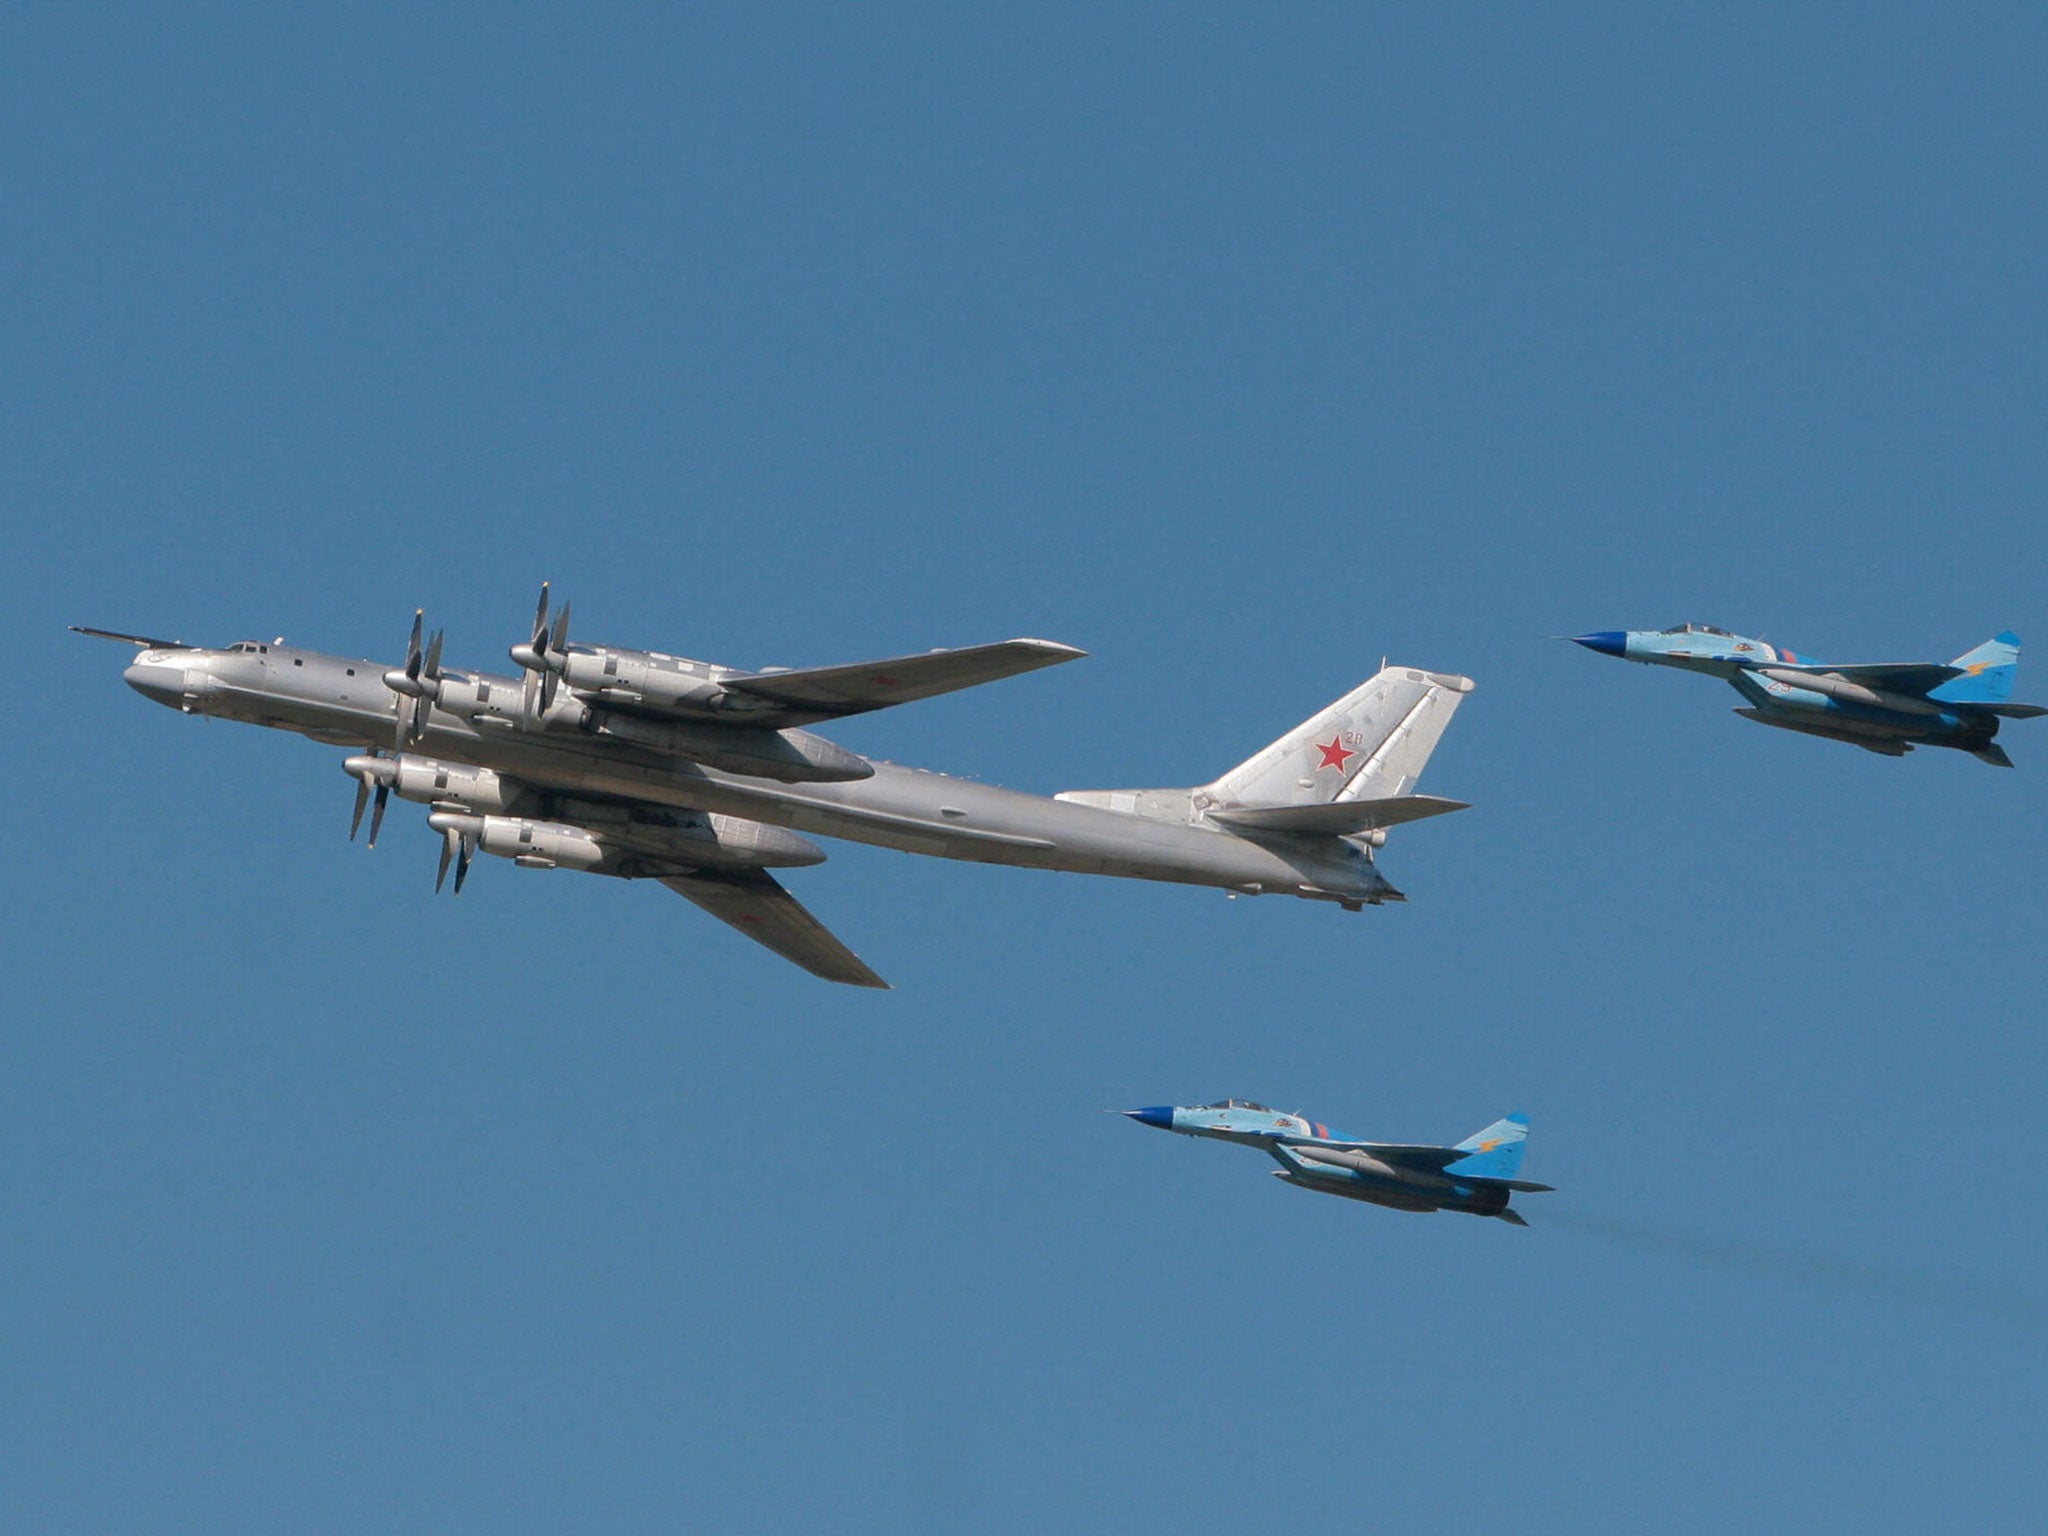 The two bomber planes (not pictured) flew alongside American jets before turning back towards Russia 